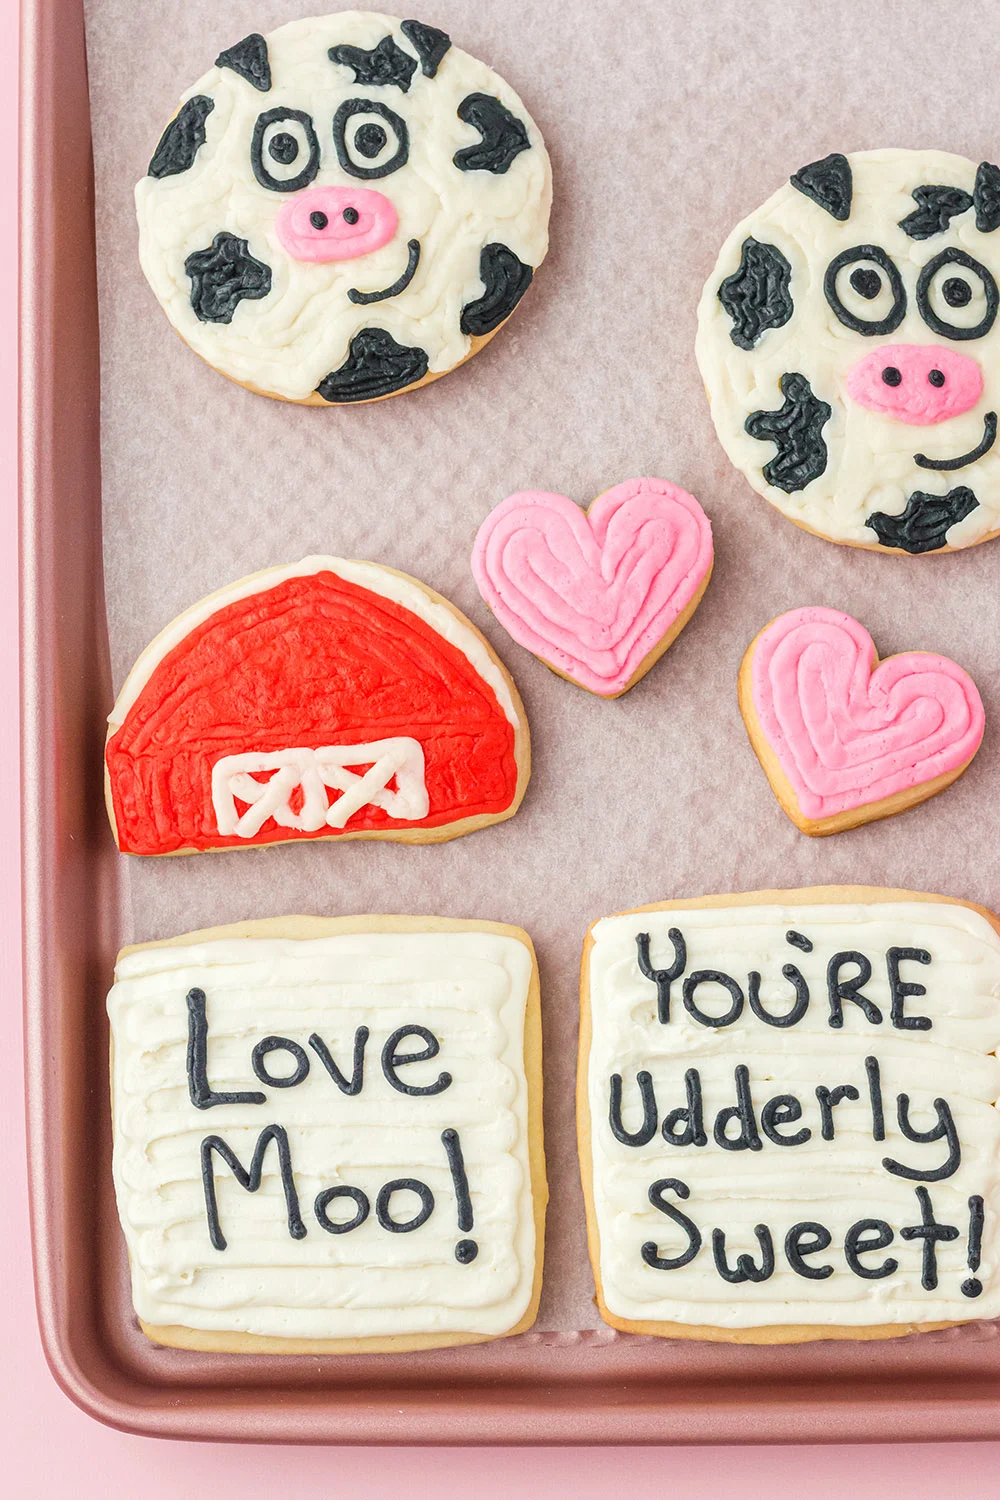 Cow, barn, heart, Love Moo, and You're Udderly Sweet decorated cookies on a sheet. 